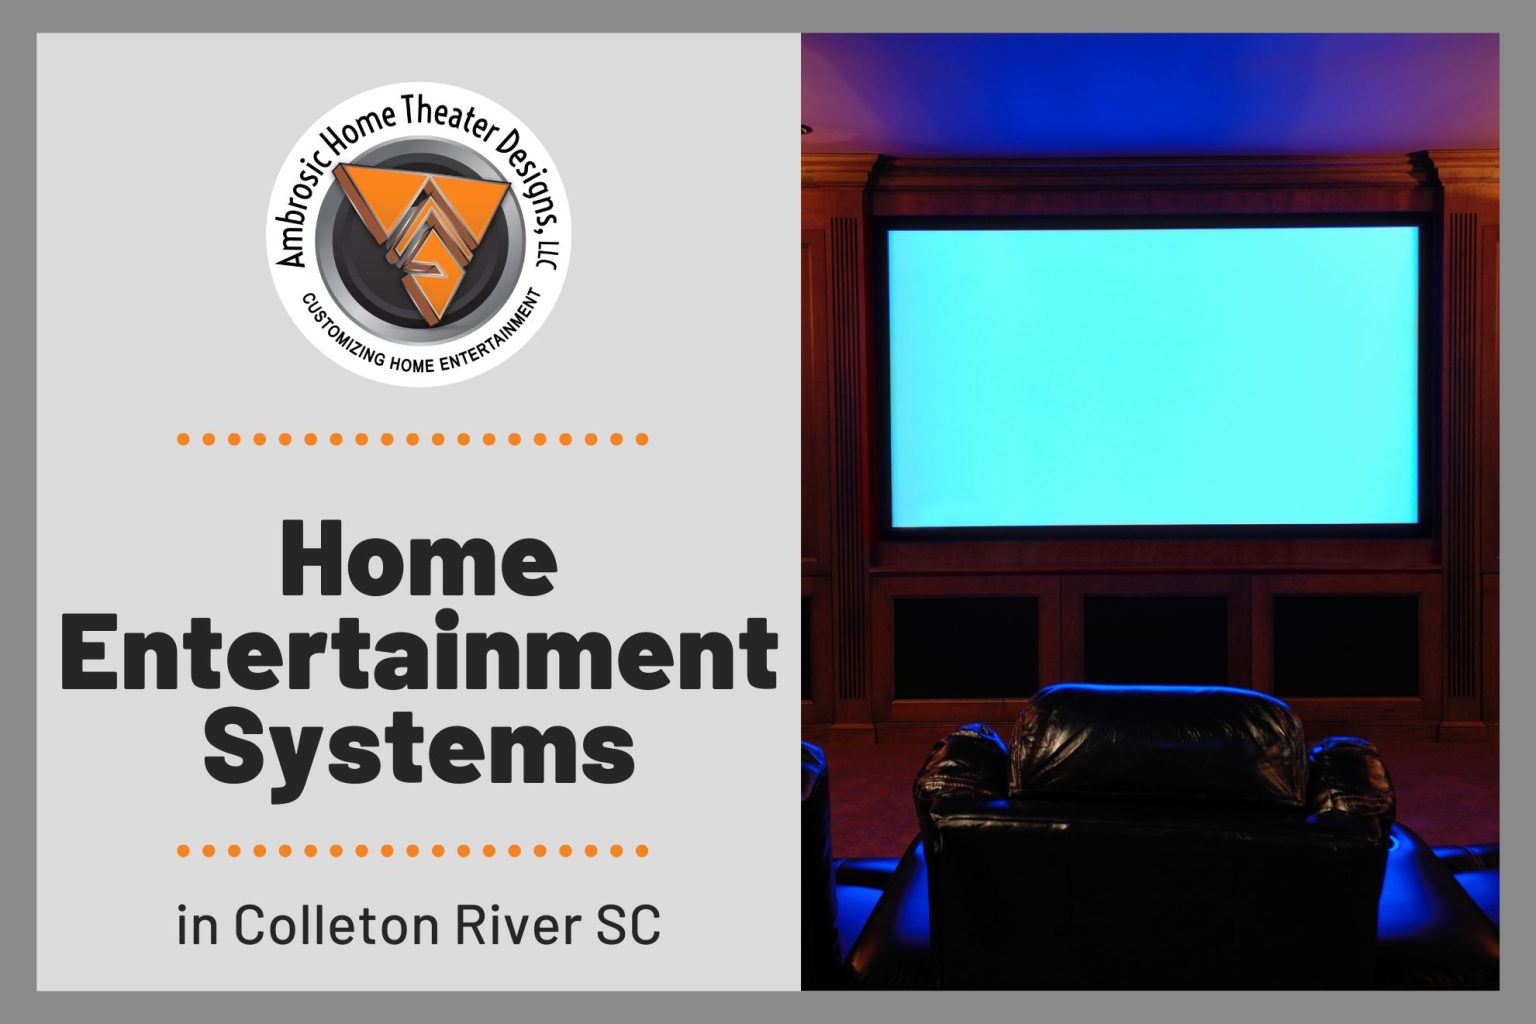 Home Entertainment Systems in Colleton River SC